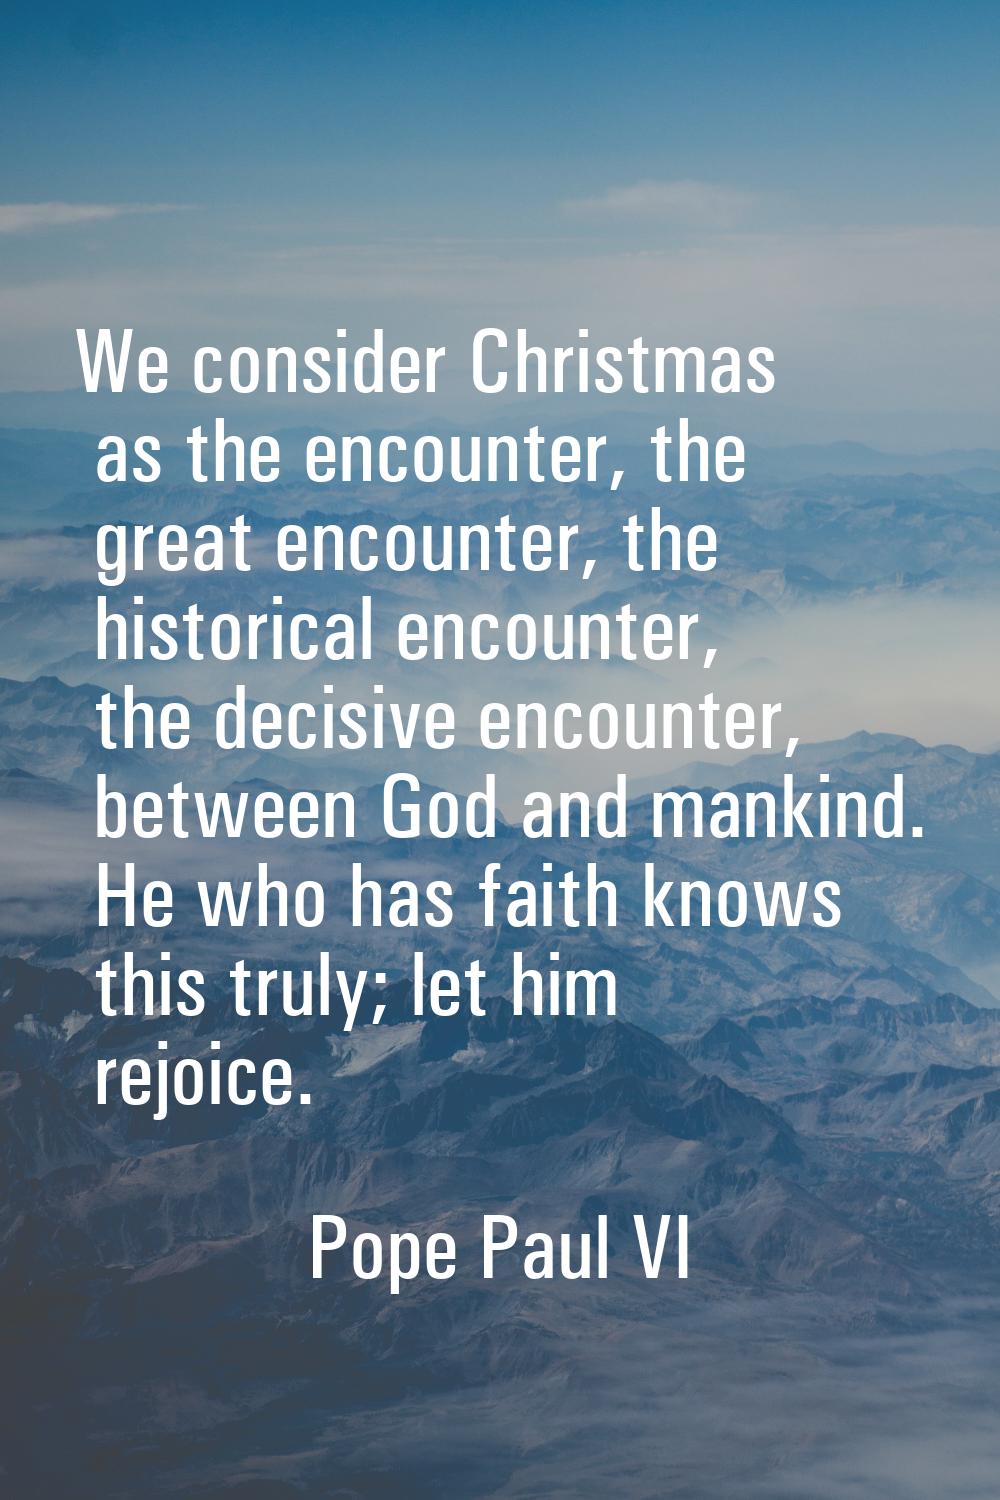 We consider Christmas as the encounter, the great encounter, the historical encounter, the decisive